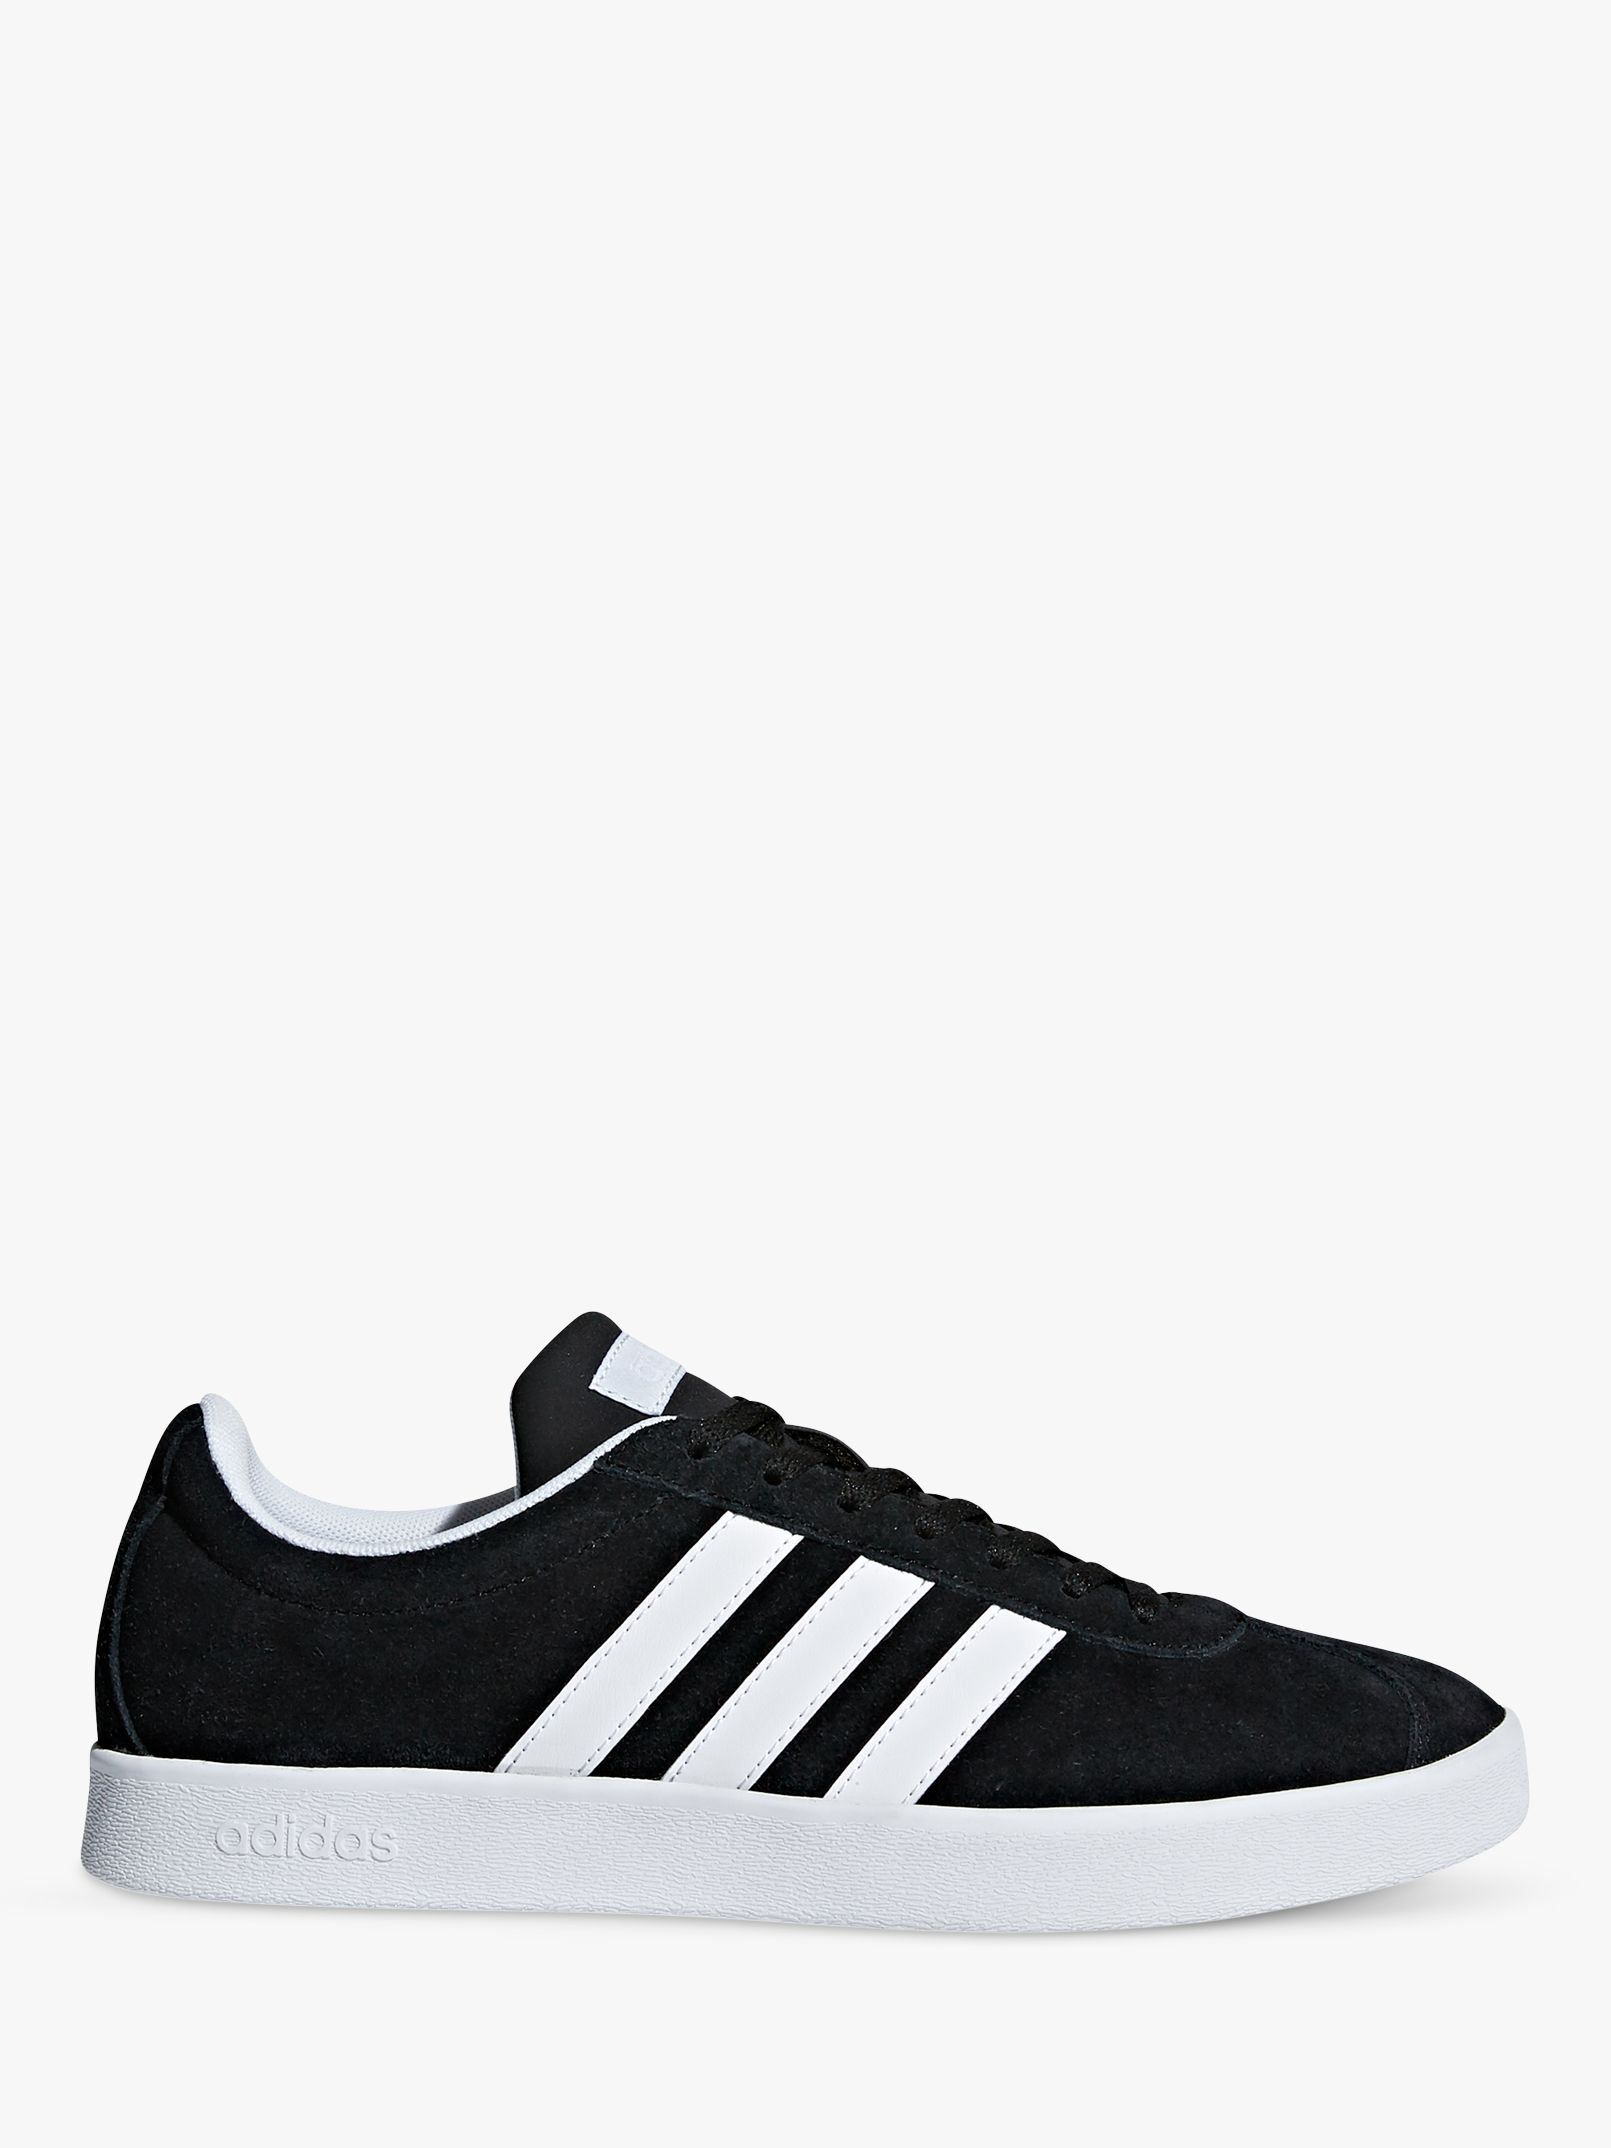 adidas all black womens trainers